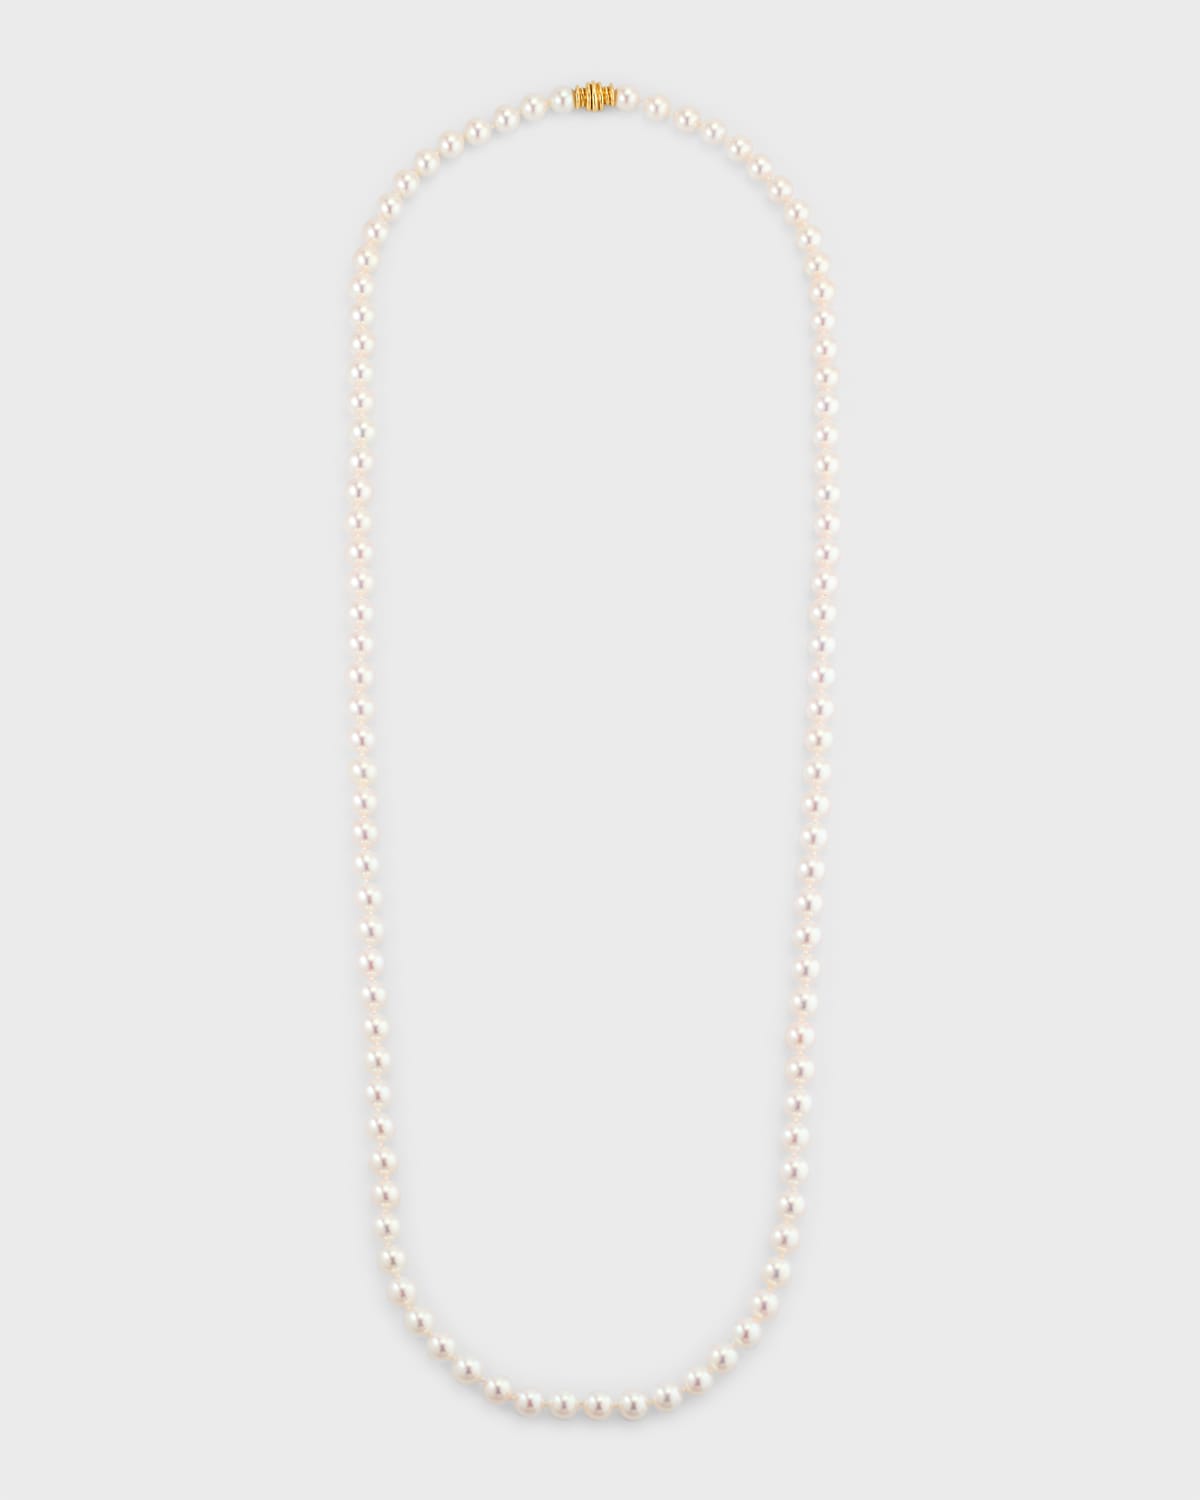 Assael 32" Akoya Cultured 8mm Pearl Necklace with Yellow Gold Clasp